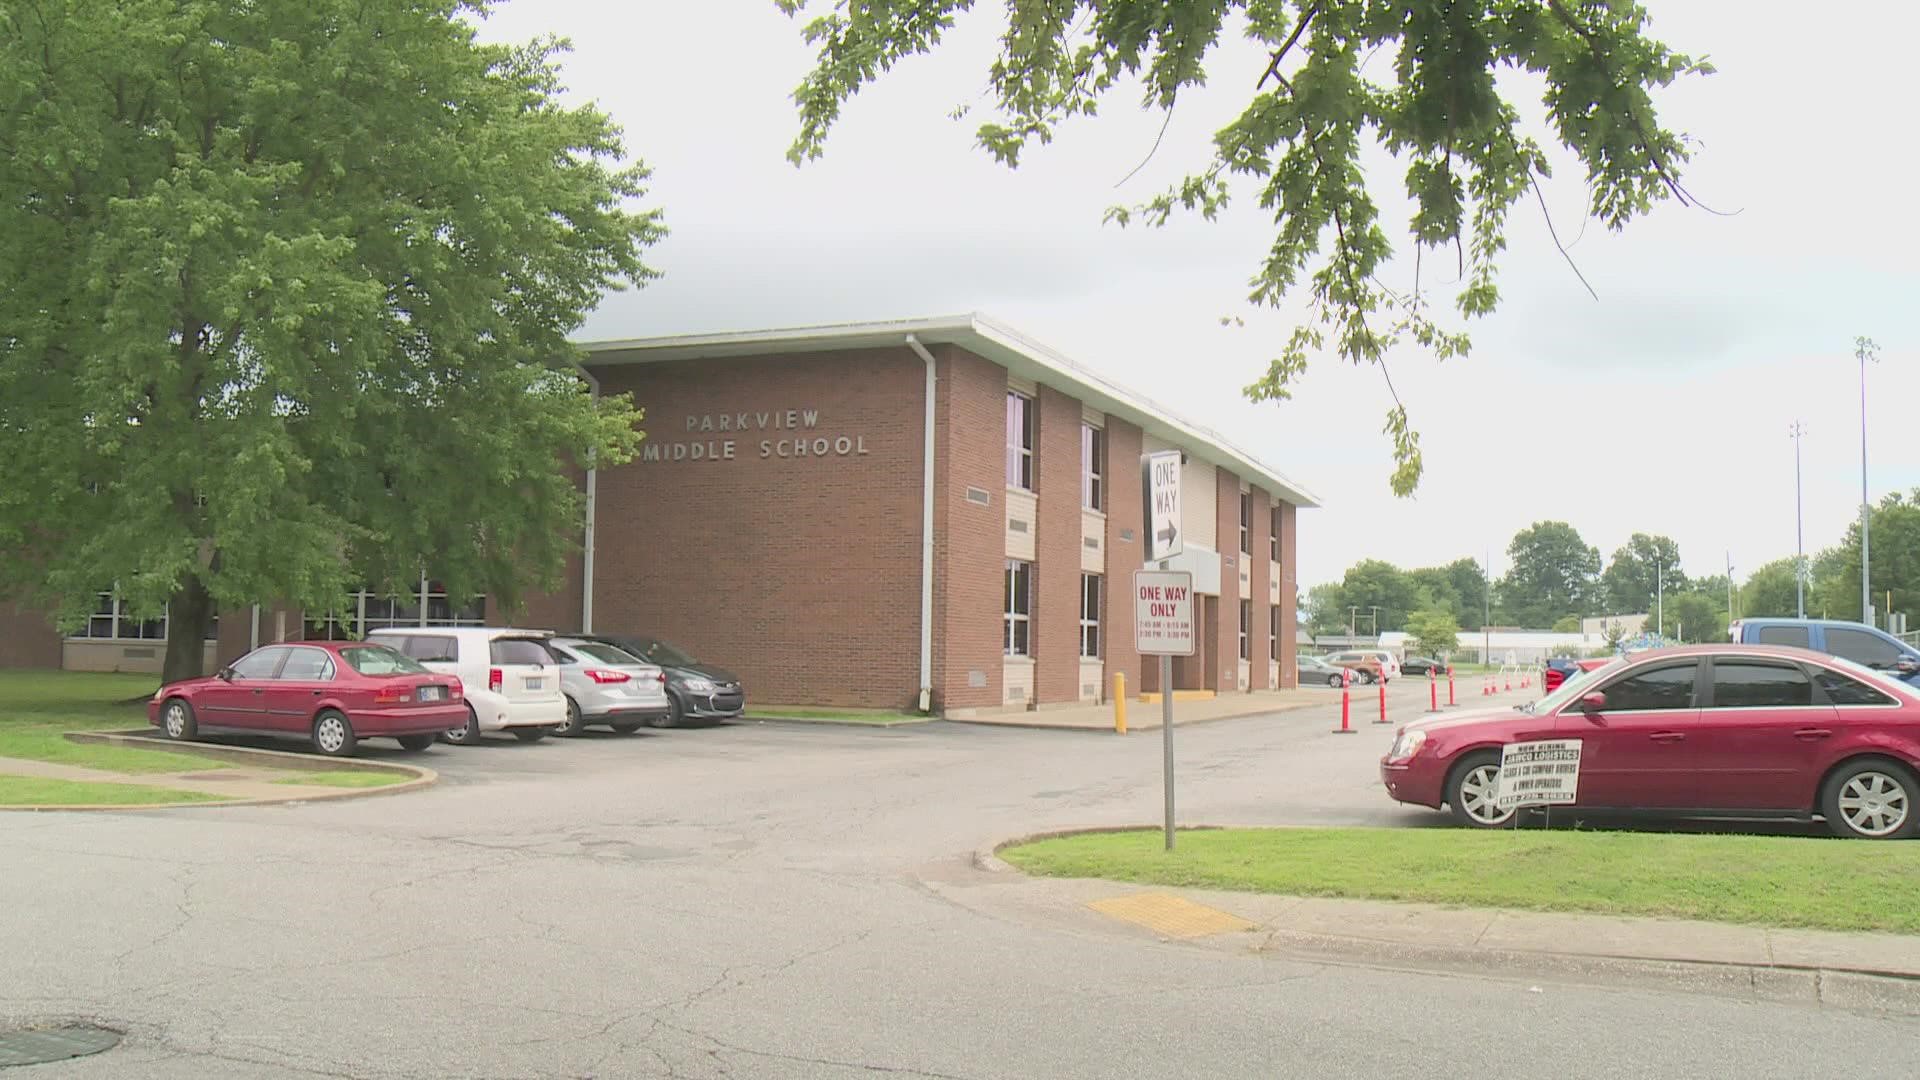 The district is axing plans to move the middle school after parents raised concerns. WHAS11 spoke with some who said the renovation is a good idea.